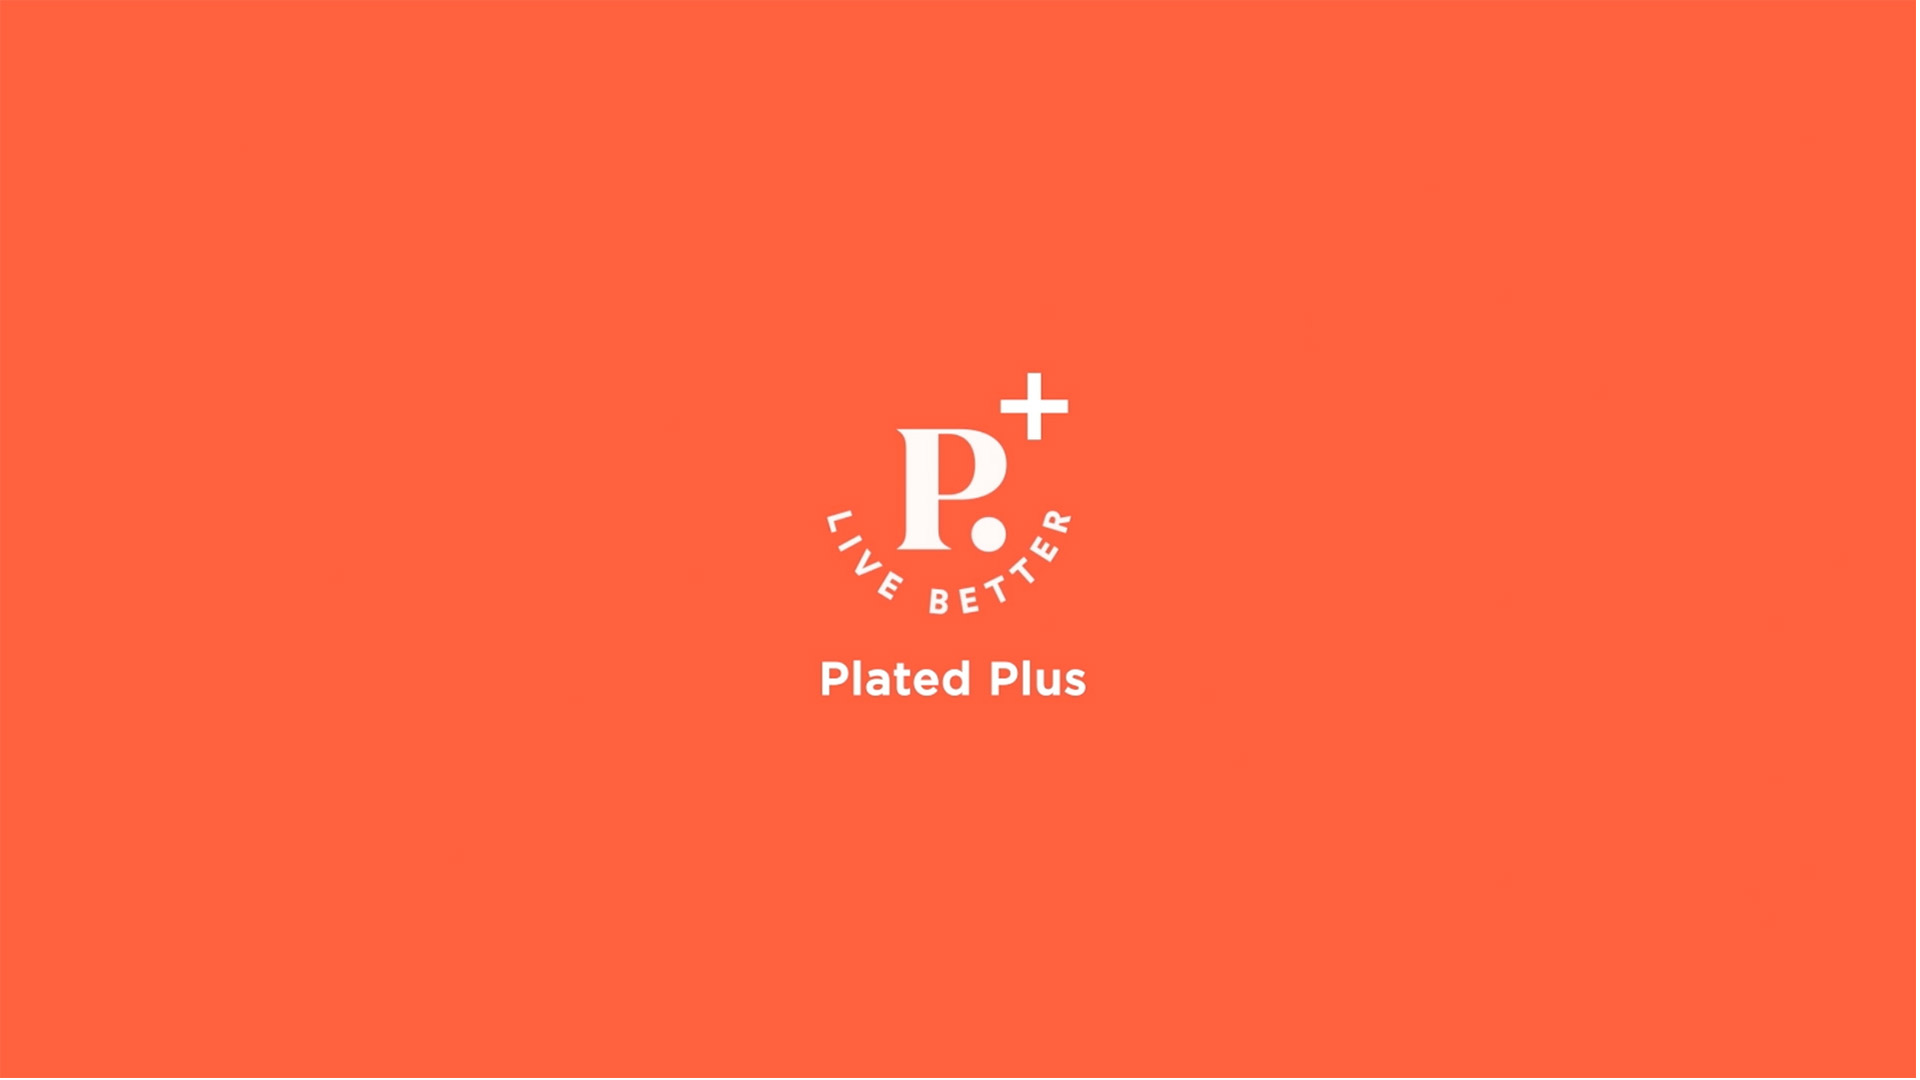 Plated Plus